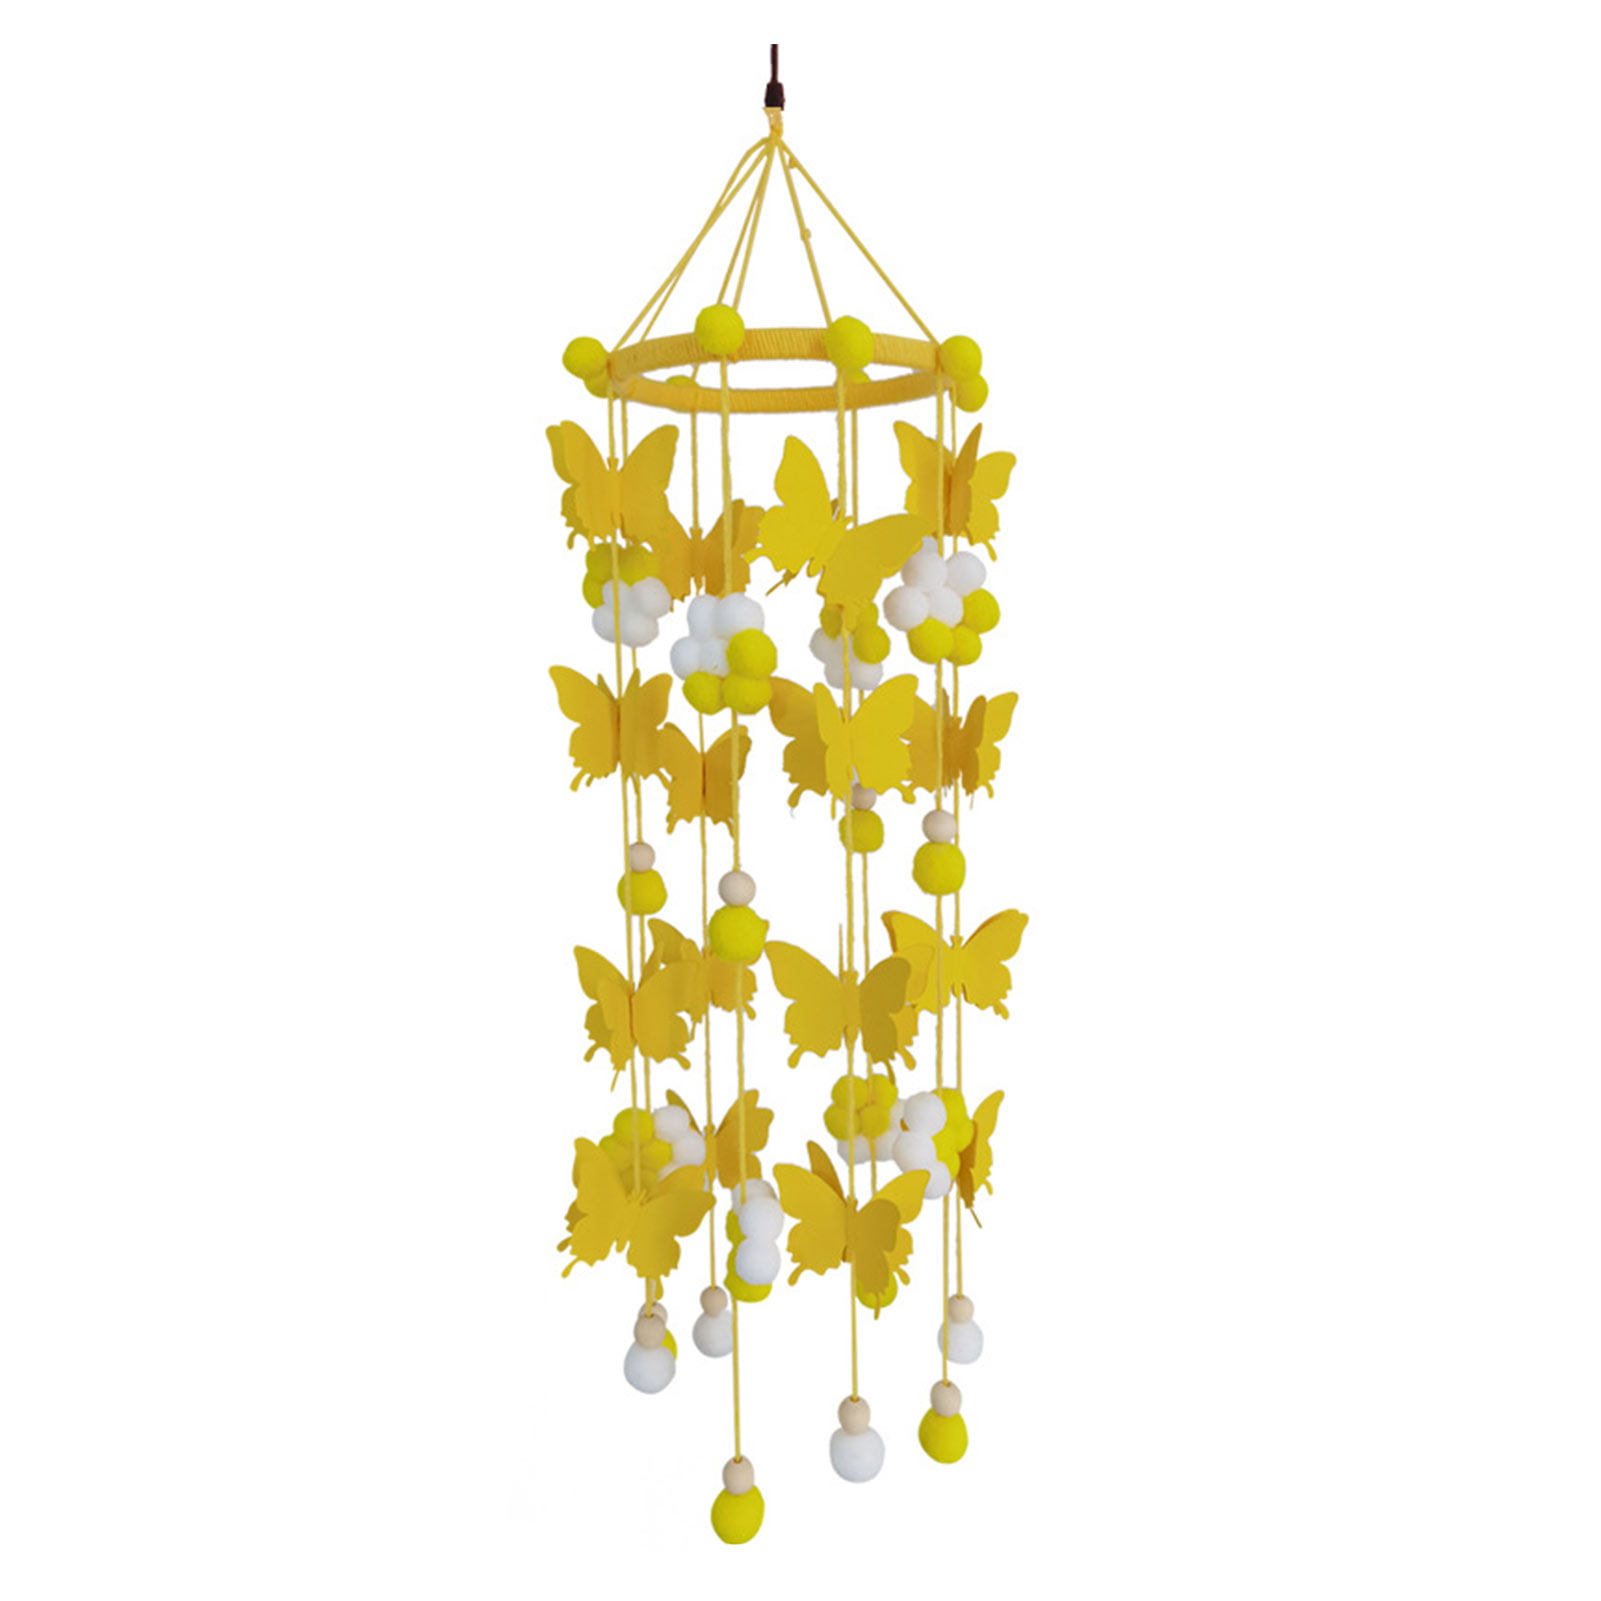 Small Foot Animal Mobile Hanging Cloud Butterfly Decoration Nursery Ceiling Mobile Baby Cot Felt Ball Mobile Infant Crib Musical Mobile Baby Wind Chimes